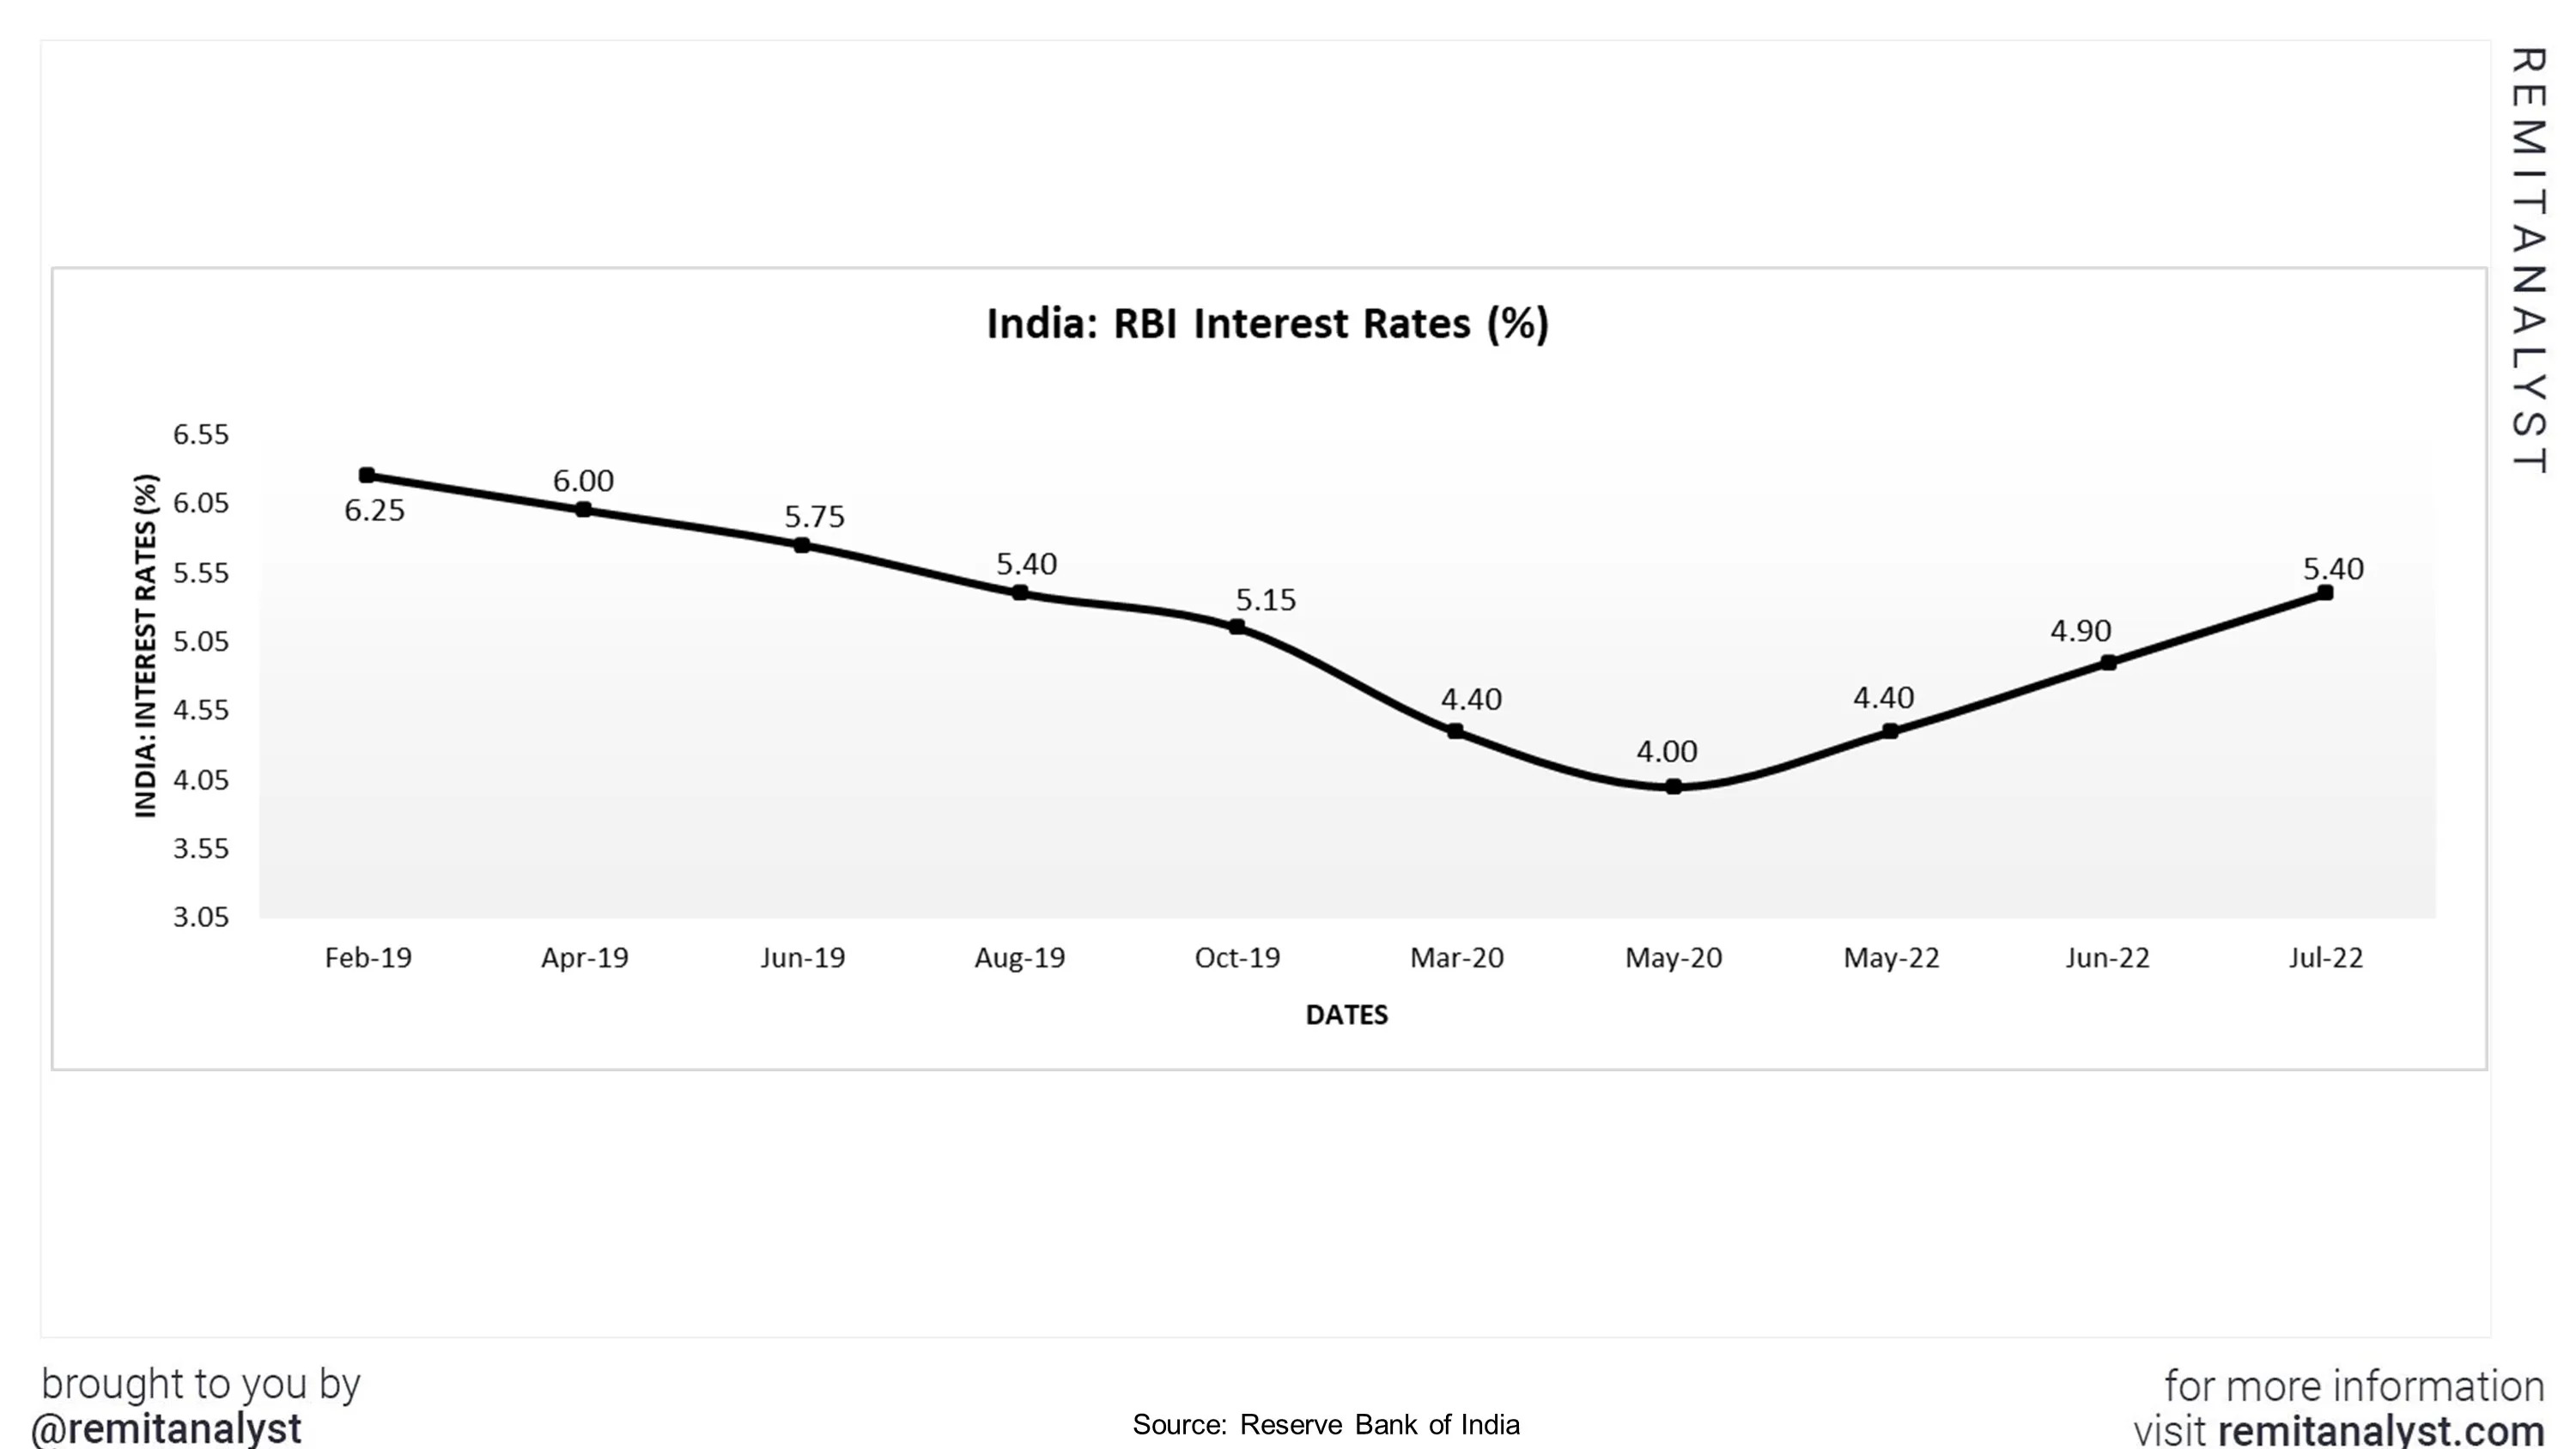 interest-rates-india-from-feb-2019-to-july-2022